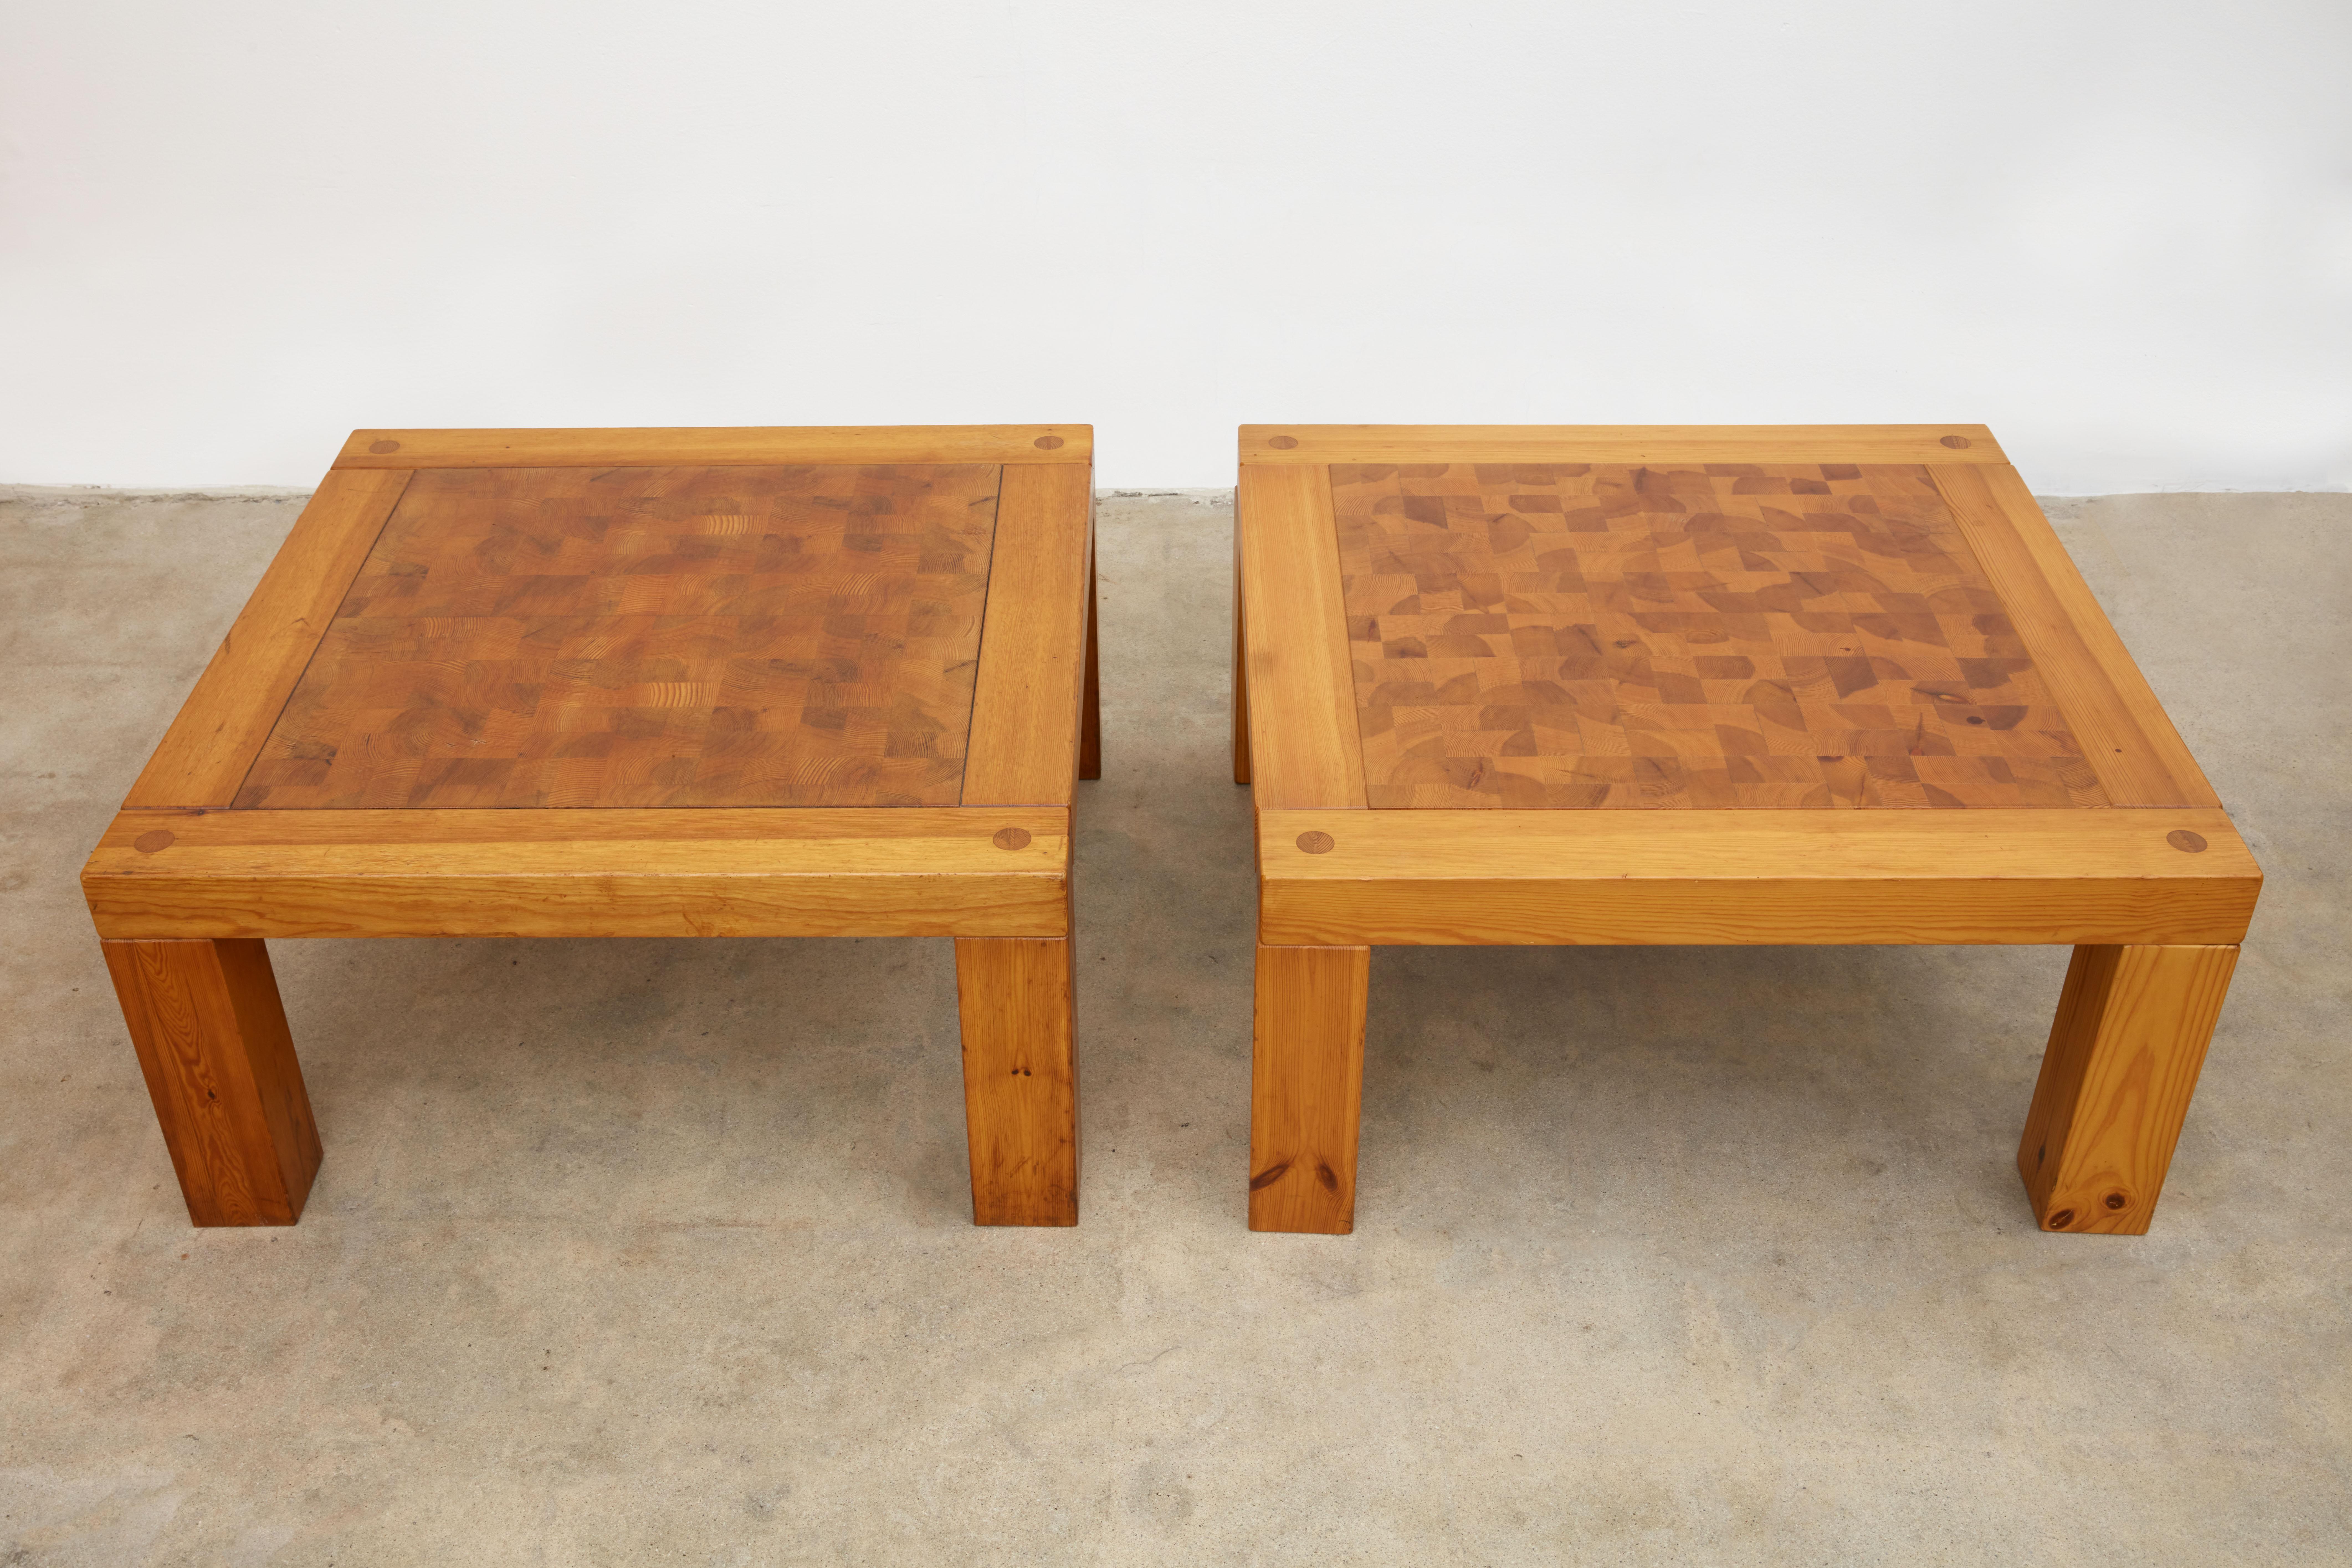 Pair of pine wood side tables with end grain marquetry detail tops.